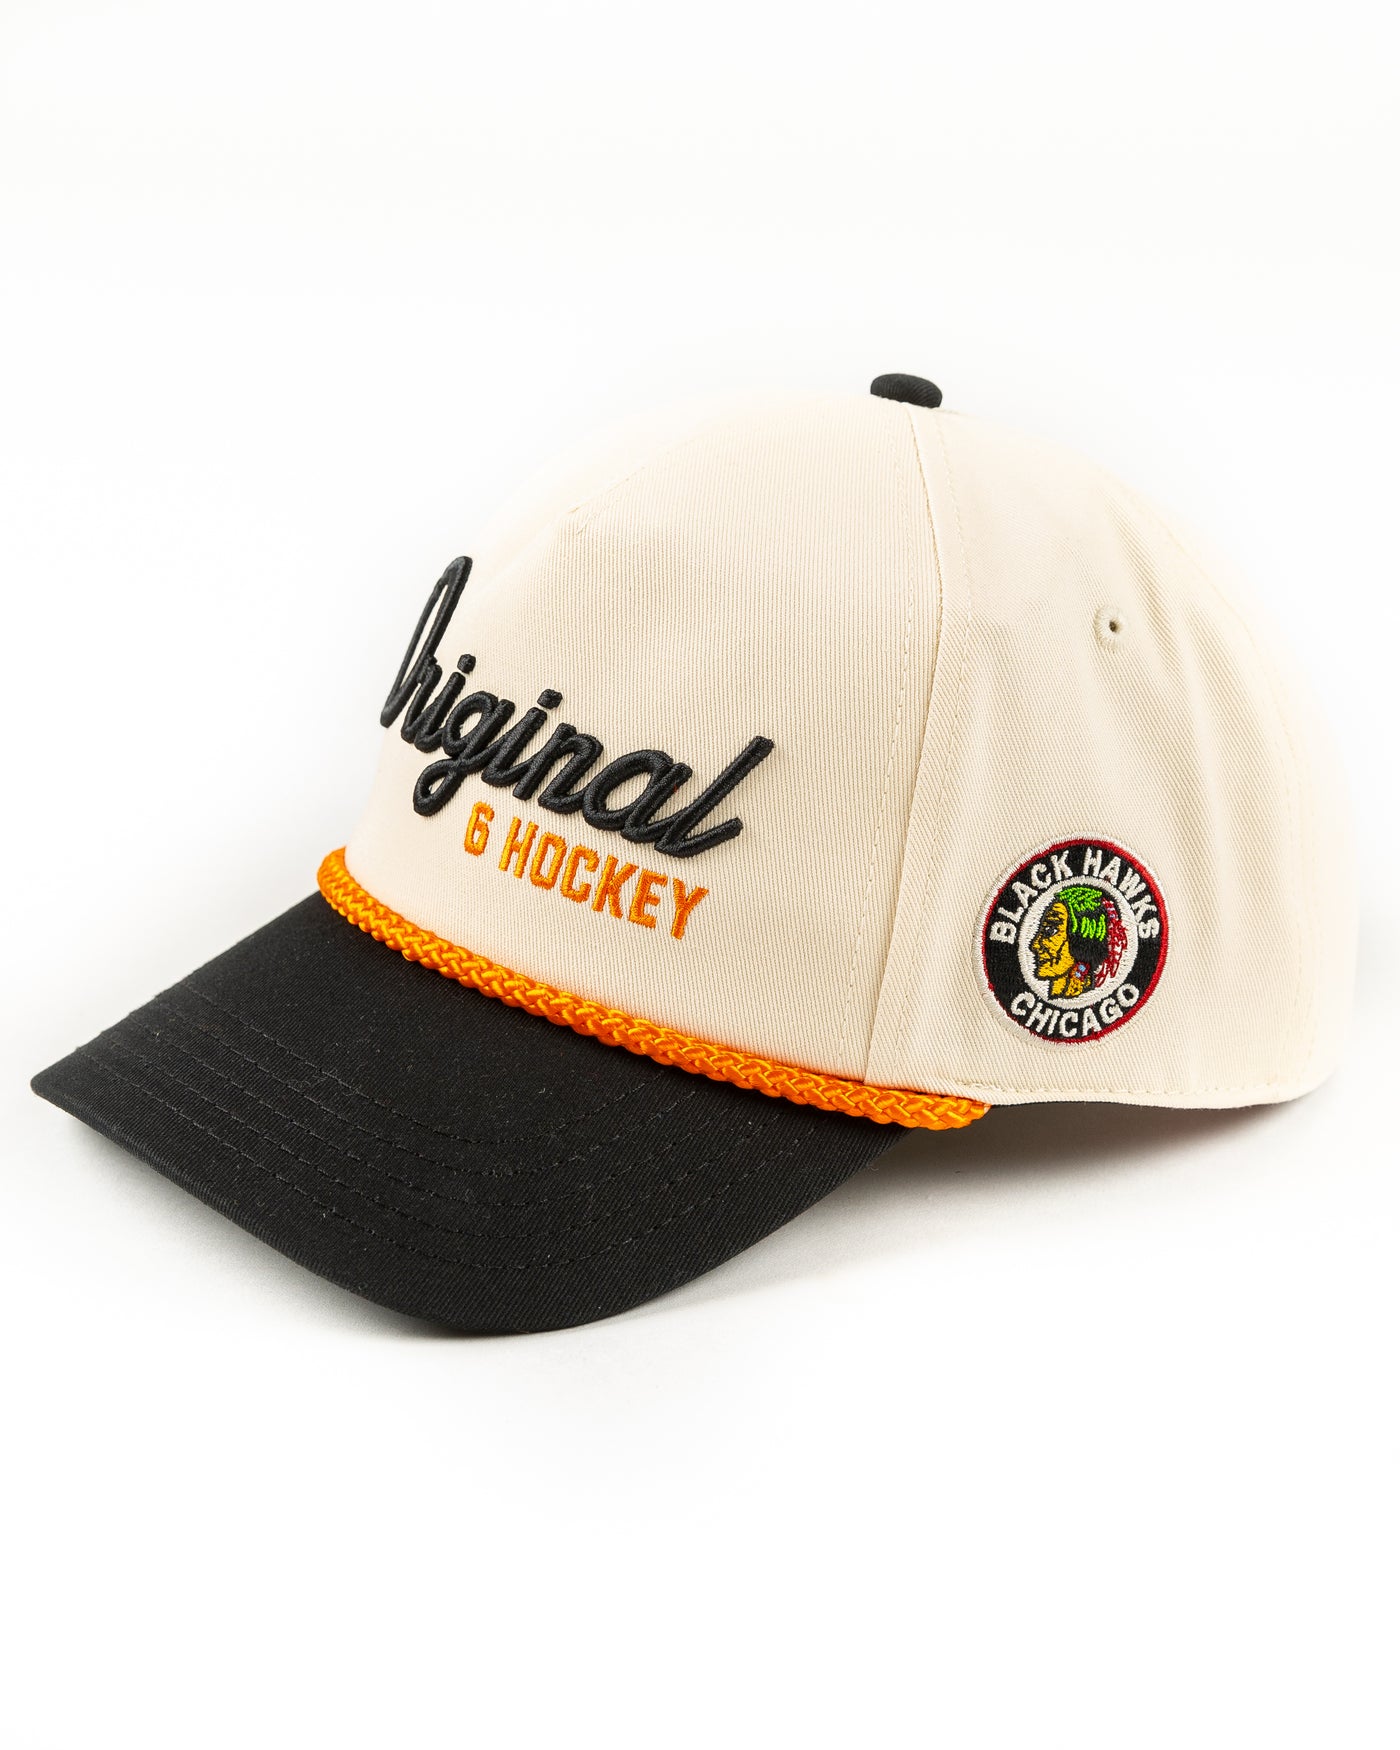 beige, black and orange snapback rope hat with Original Six hockey word graphic across front and vintage Chicago Blackhawks logo embroidered on left side - left angle lay flat